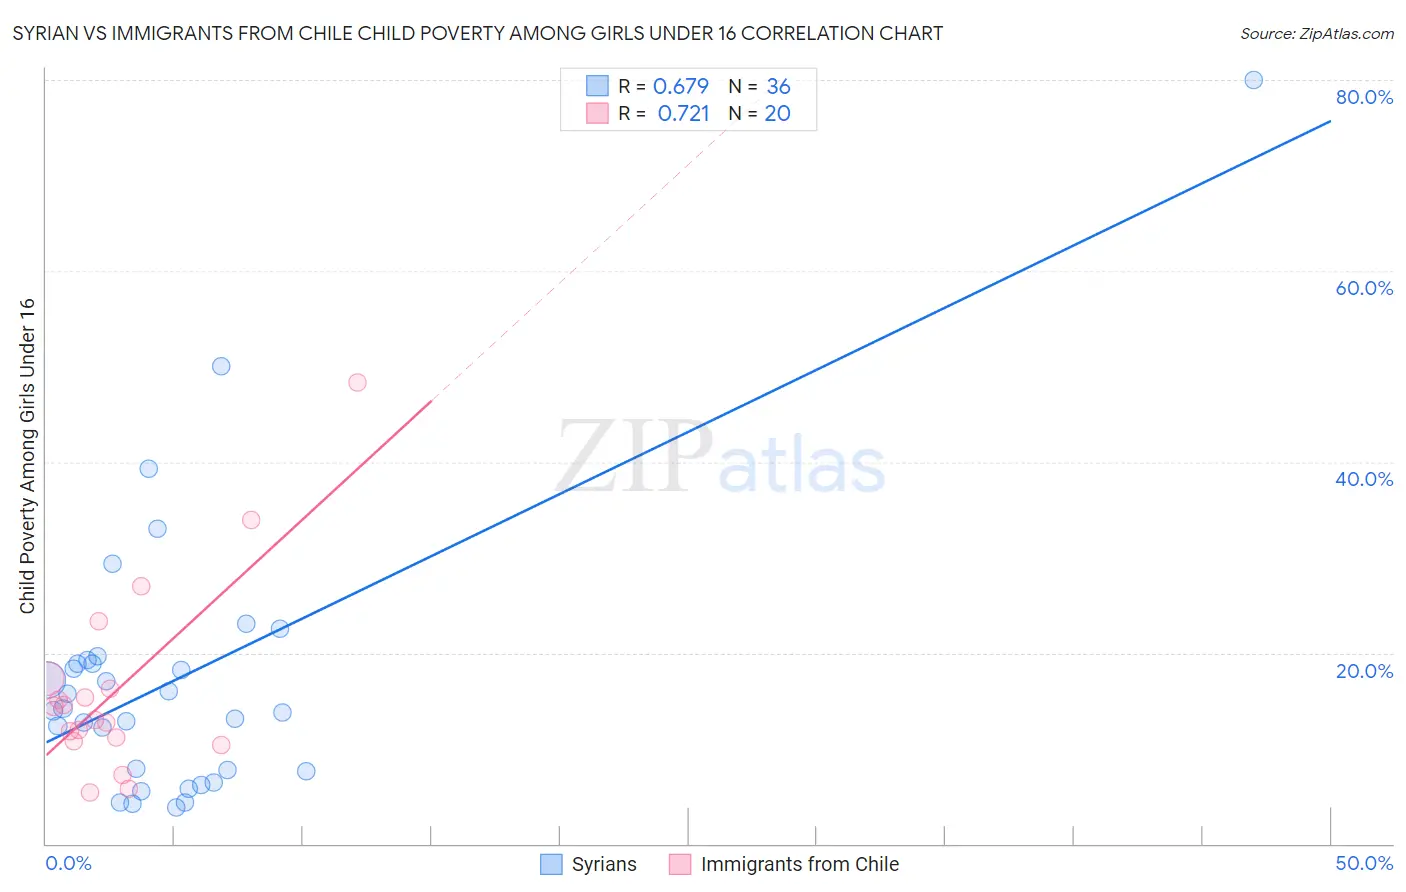 Syrian vs Immigrants from Chile Child Poverty Among Girls Under 16